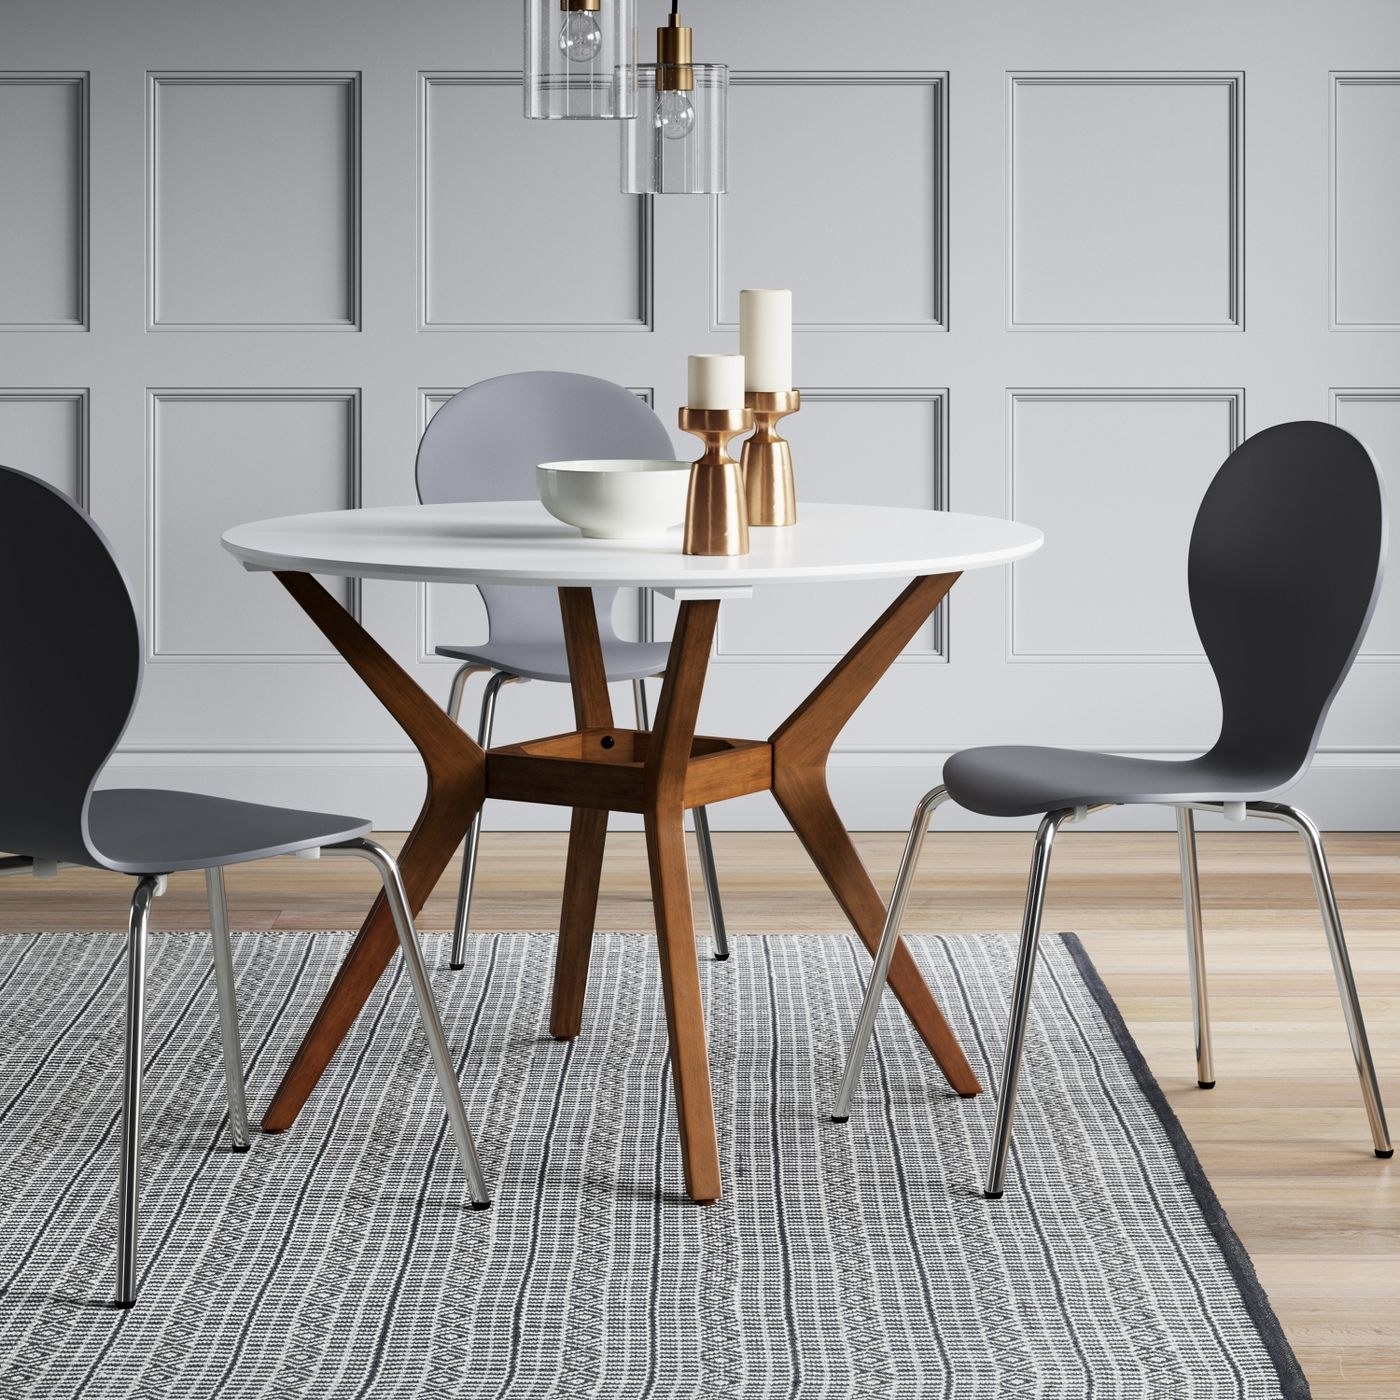 round dining table with white top and wood legs, next to black chairs